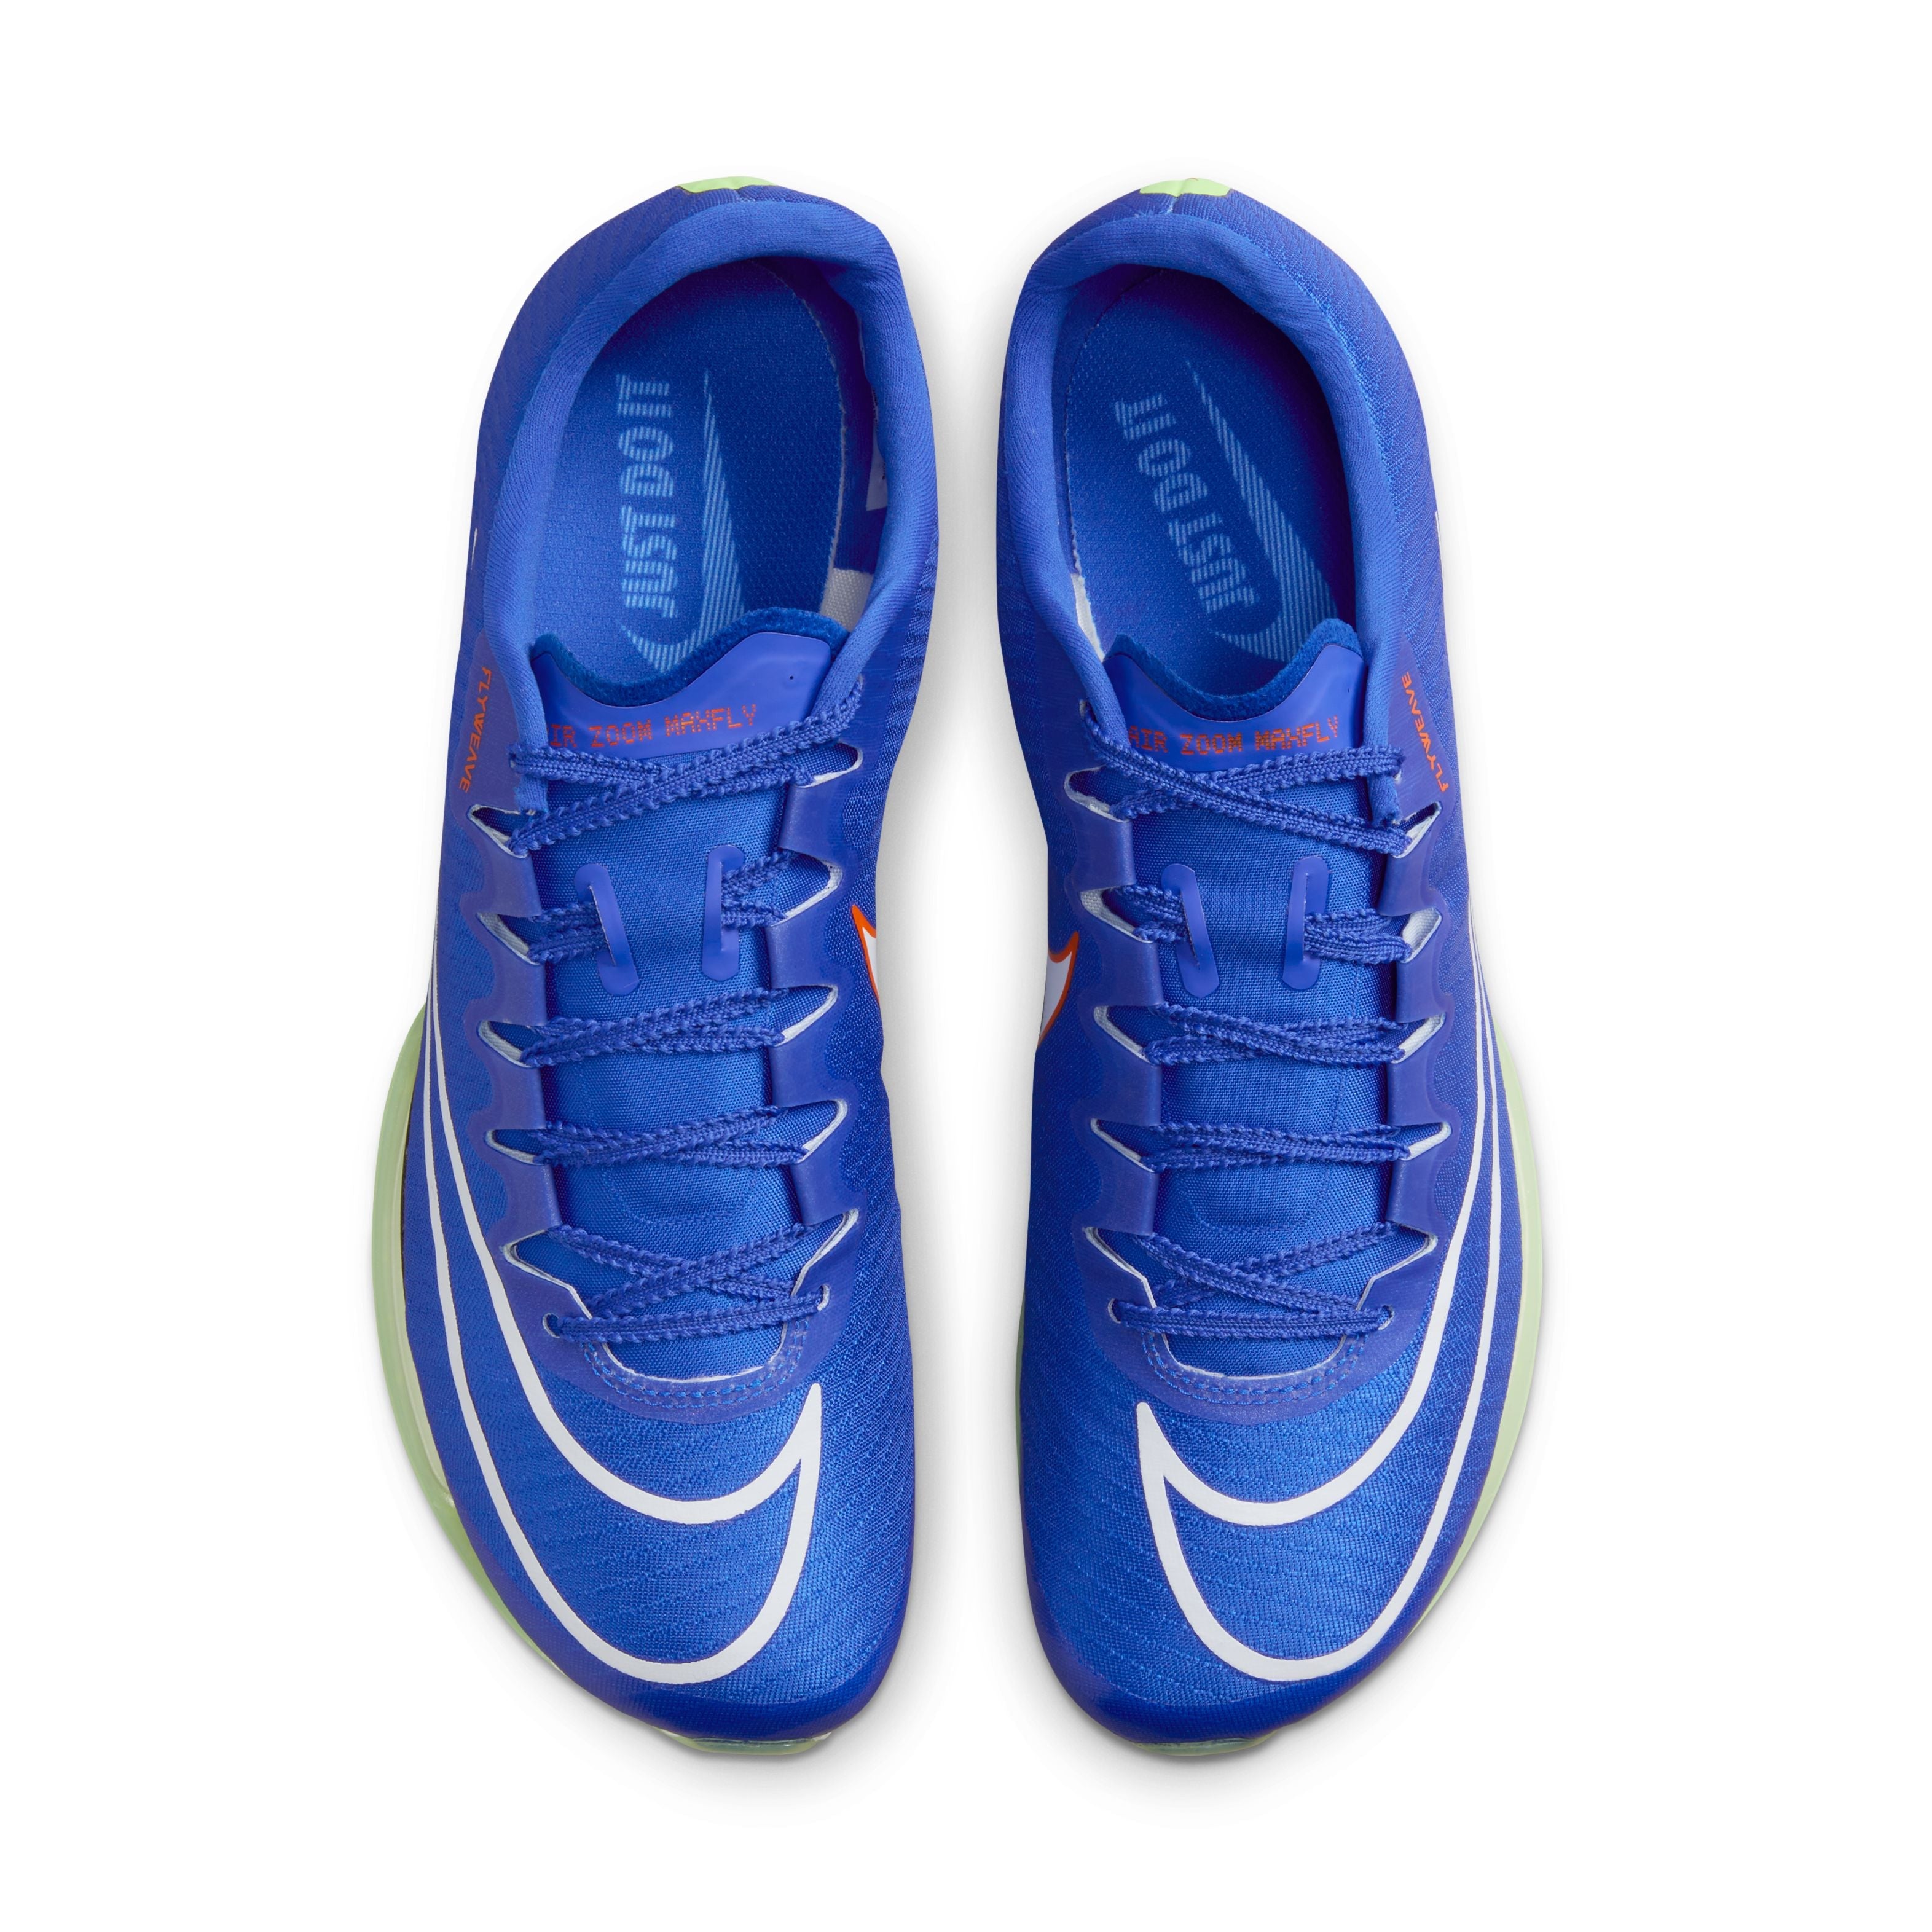 Mens Air Zoom Maxfly Running Spikes